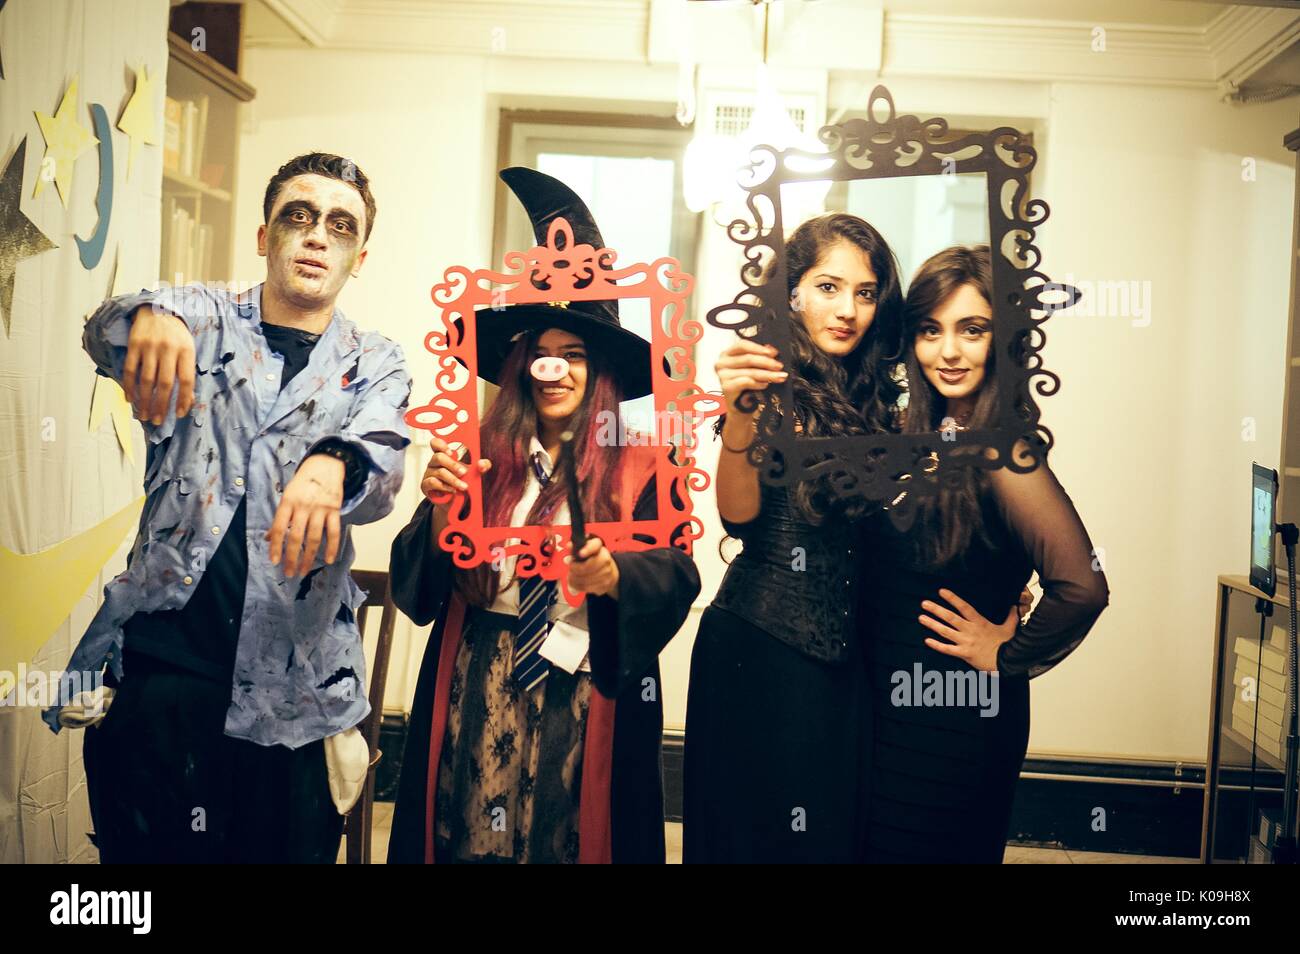 Four students in costume pose for a picture, one male student is dressed as a zombie, one girl is dressed in a witch costume with the nose of a pig and is holding a wand, and the other two girls are wearing black dresses, the girls are holding picture-frame props to outline their faces, 2015. Courtesy Eric Chen. Stock Photo